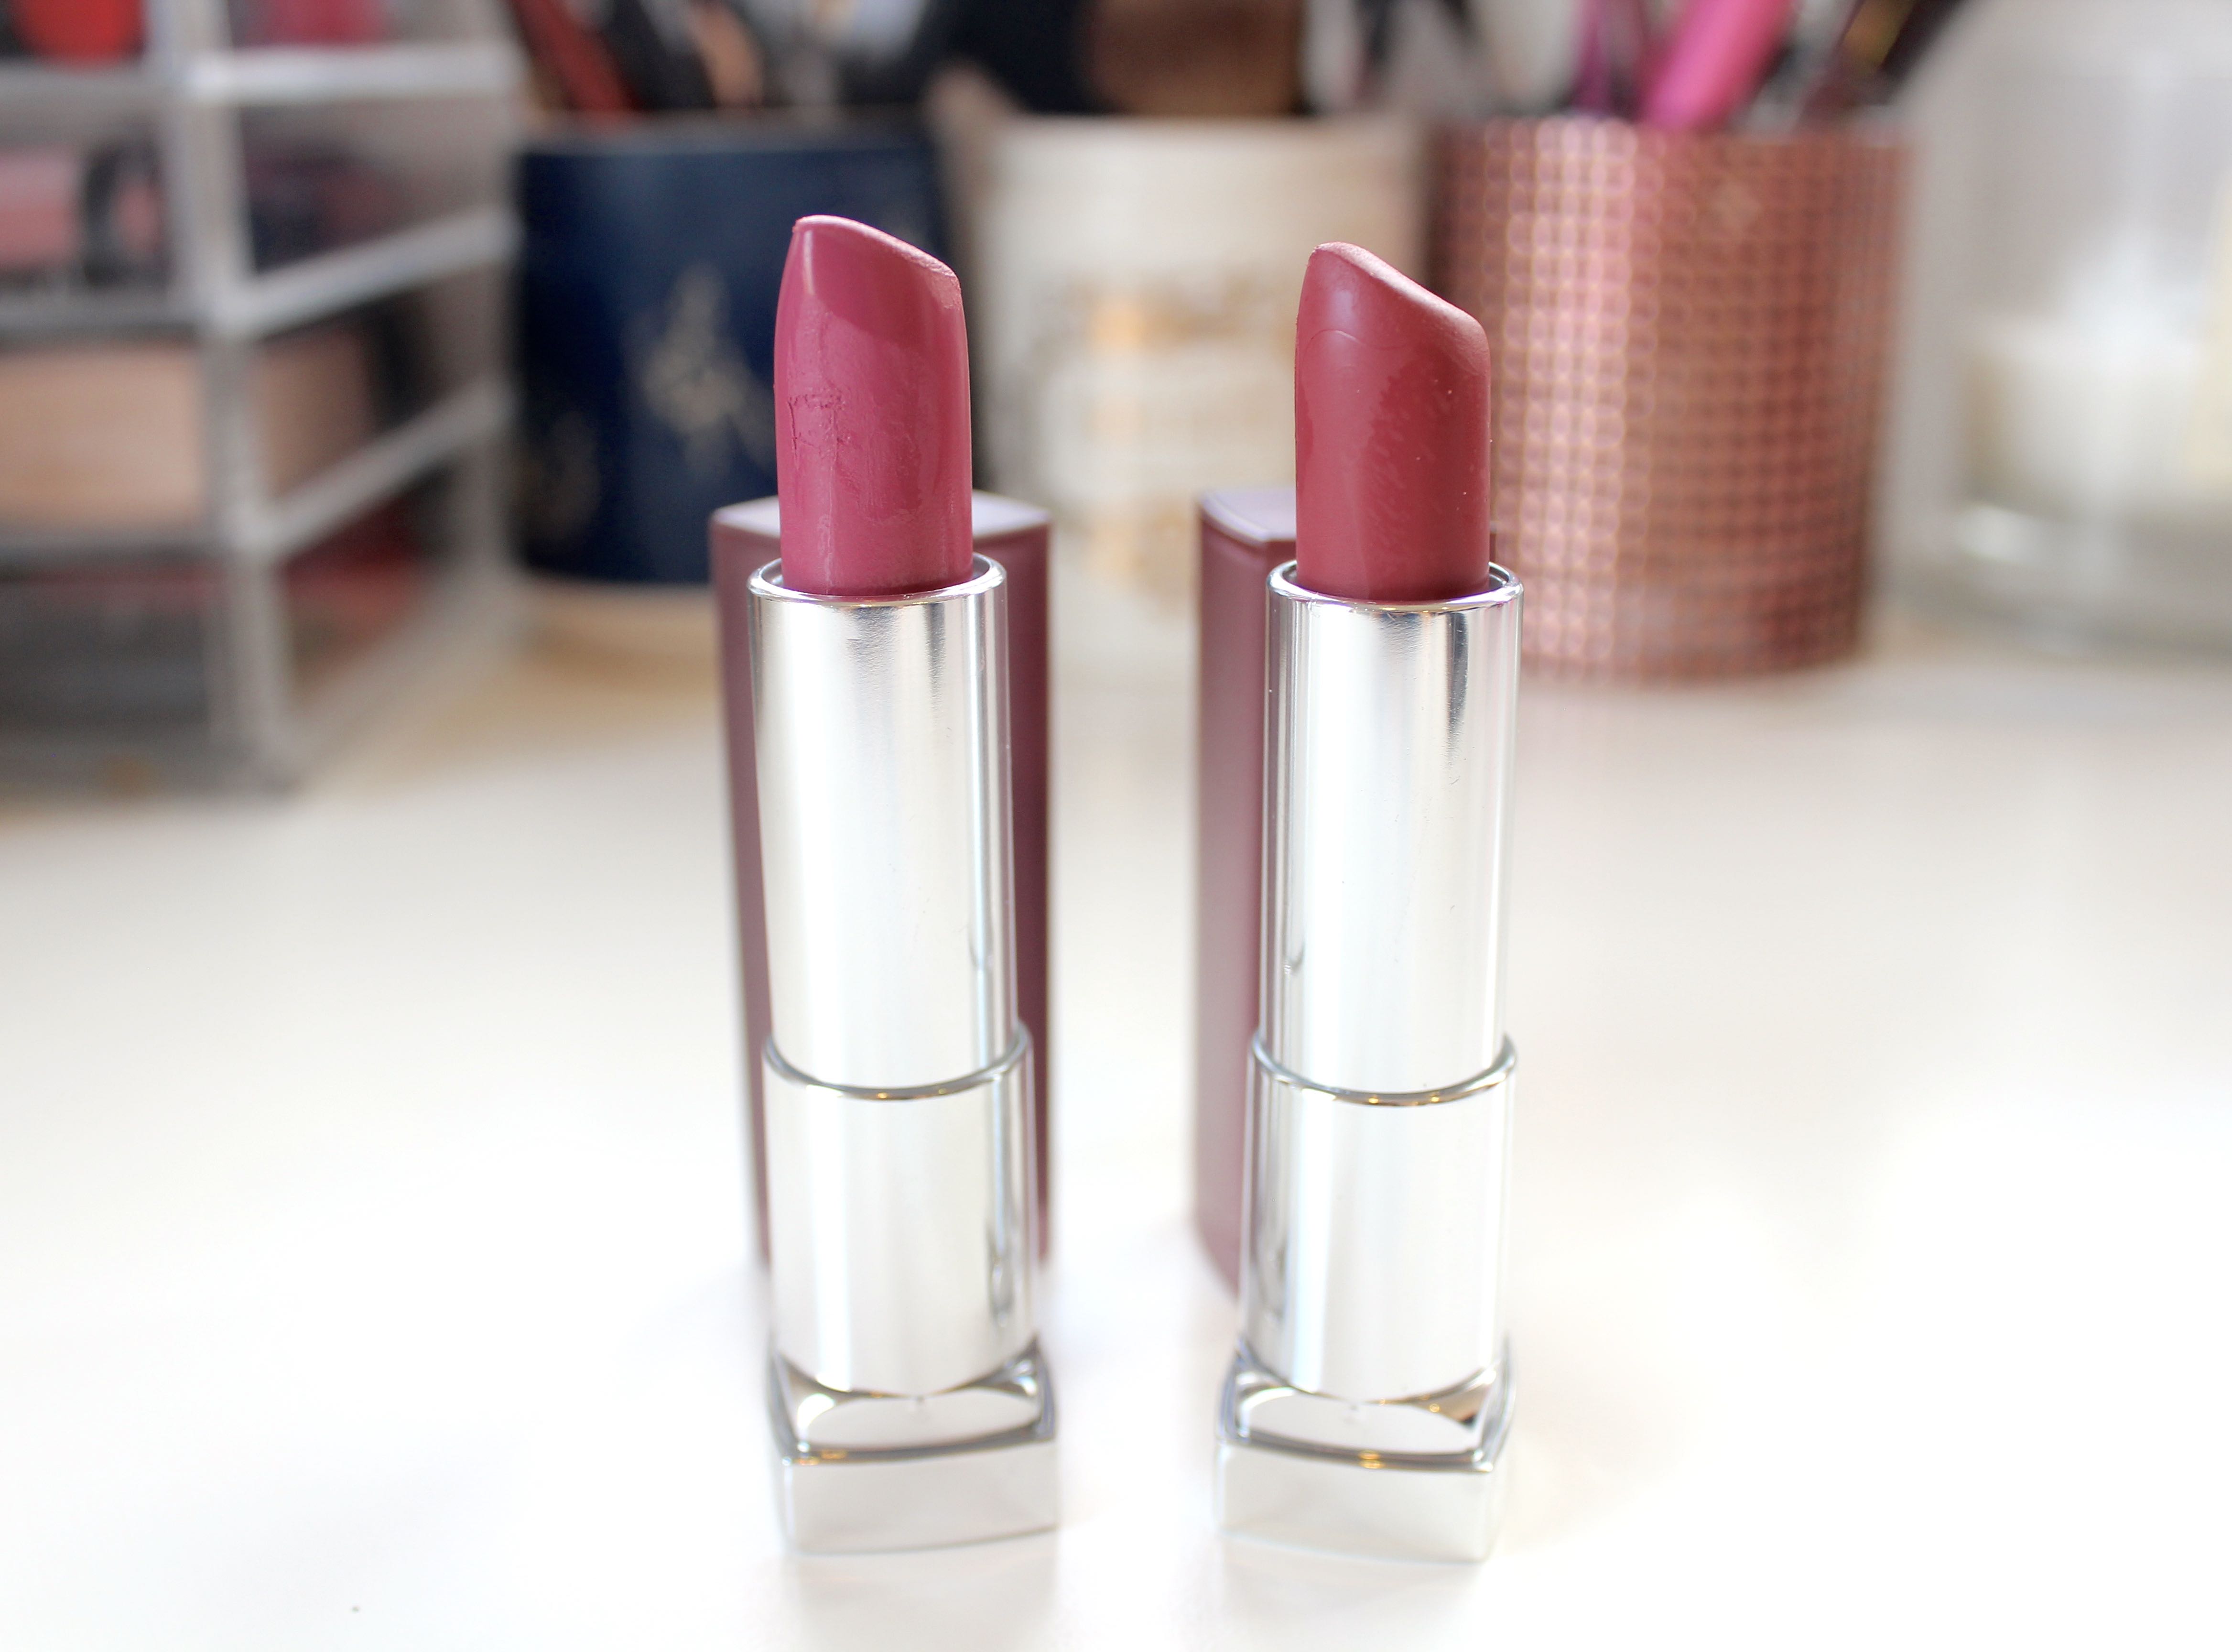 Maybelline Colour Sensation Creamy Matte Lipsticks Review by Face Made Up